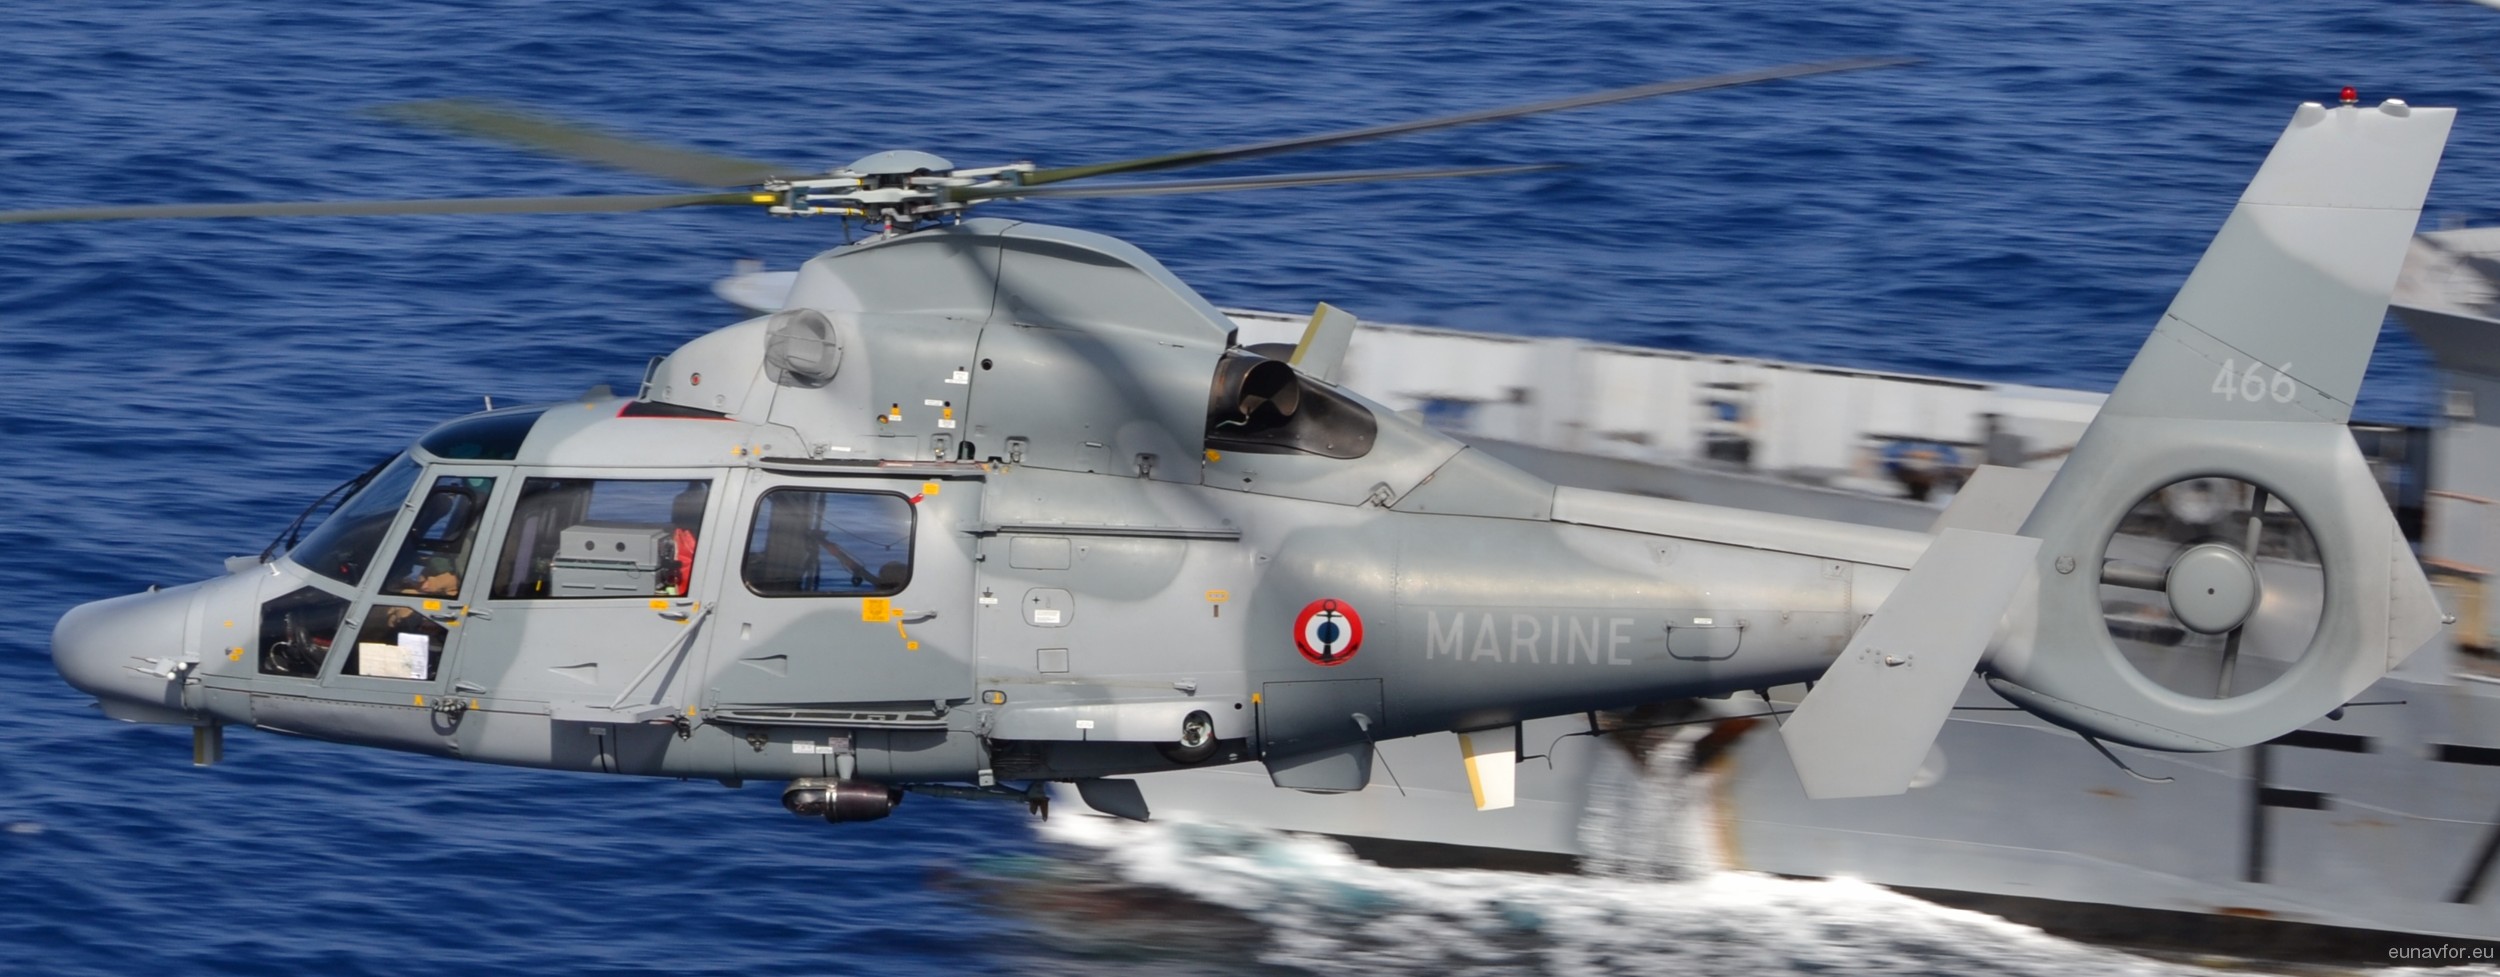 as-565sa panther helicopter french navy marine nationale flottille 36f ban hyeres toulon 466 07